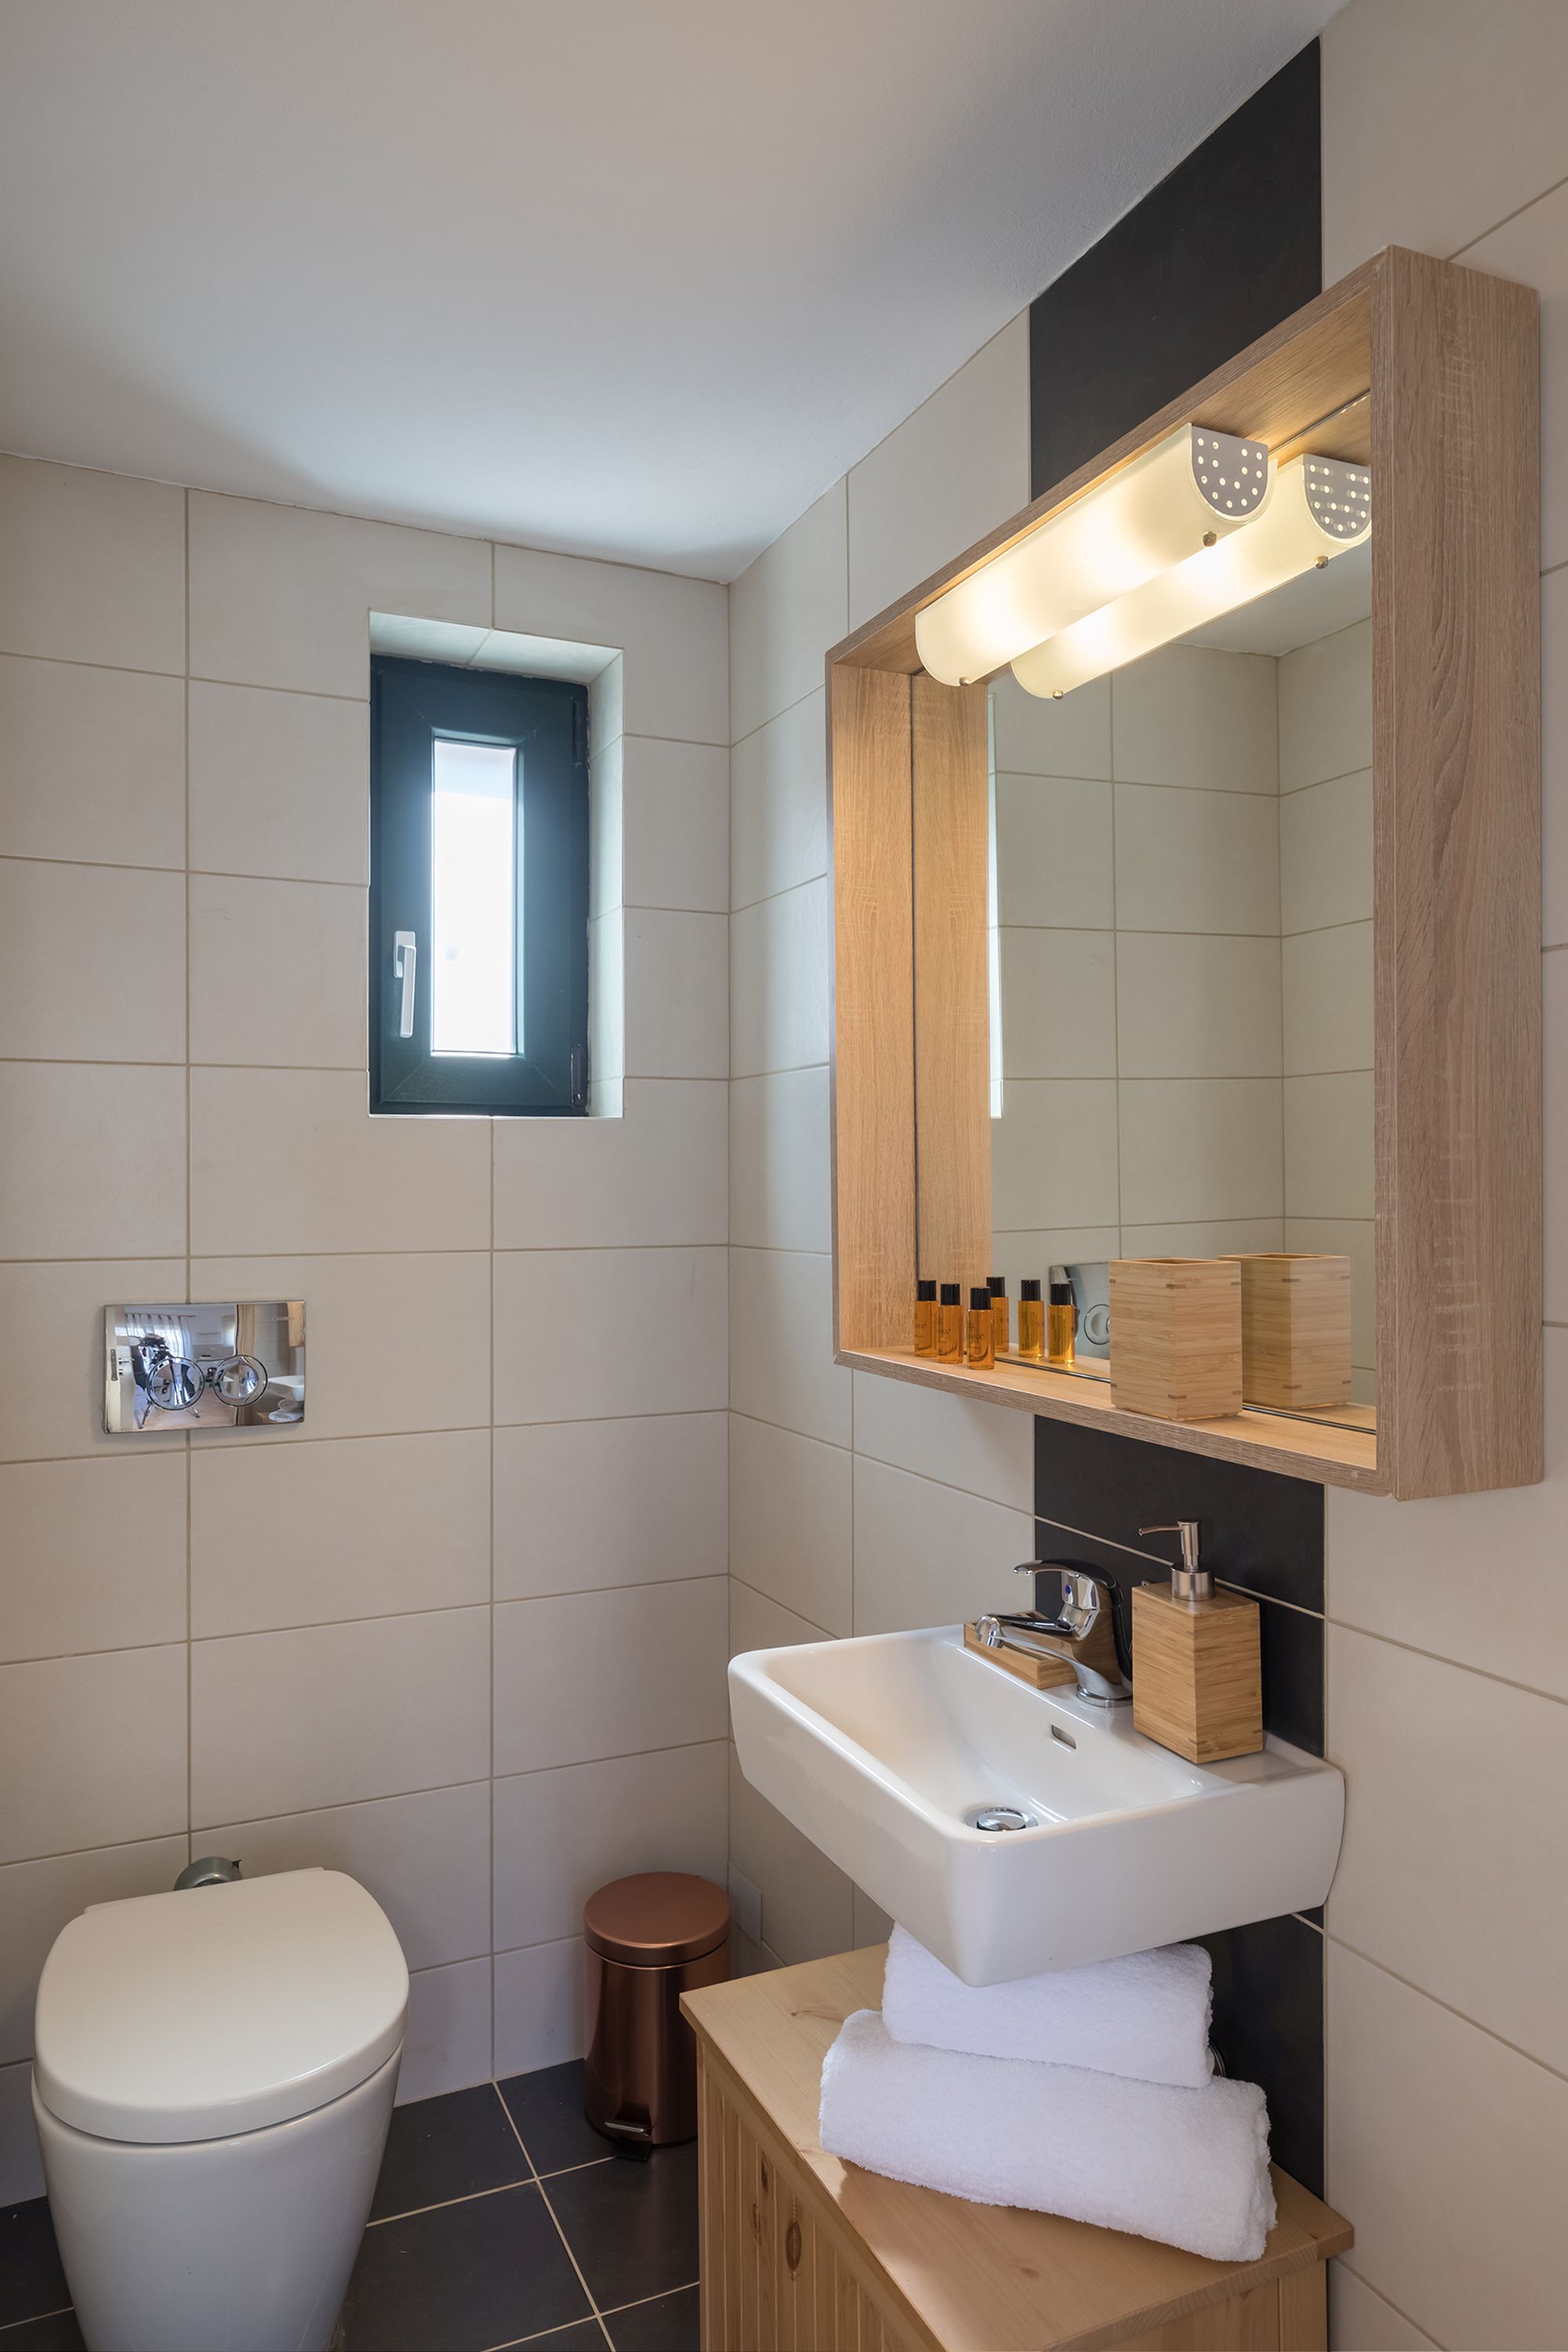 Bathroom with white and gray tiles, a white washbasin and a big wooden mirror.